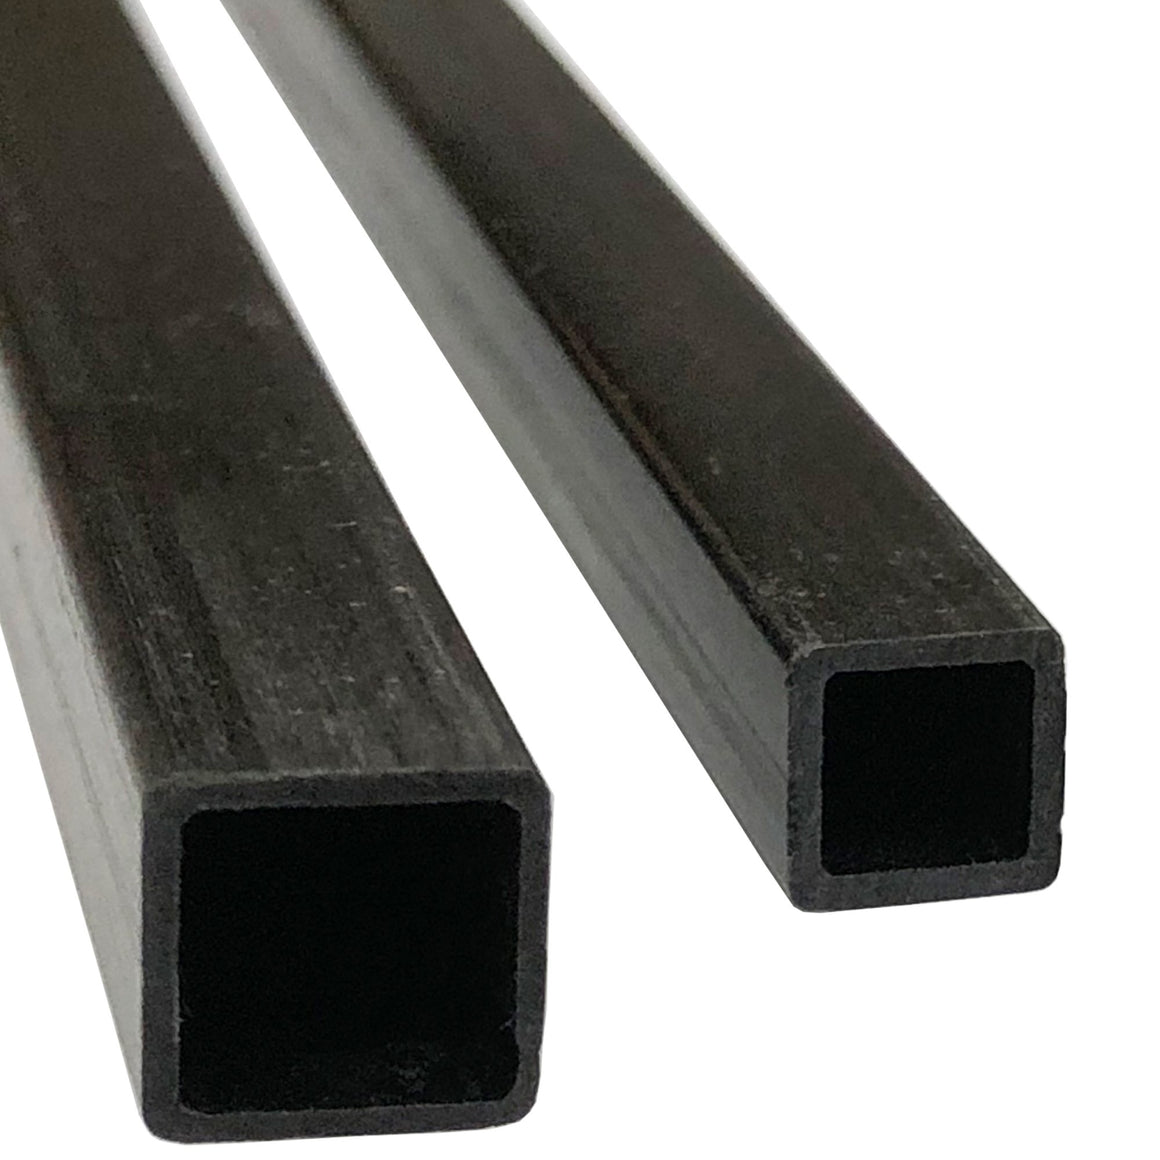 (1) Pultruded Square Carbon Fiber Tube - 8mm x 8mm x 1000mm